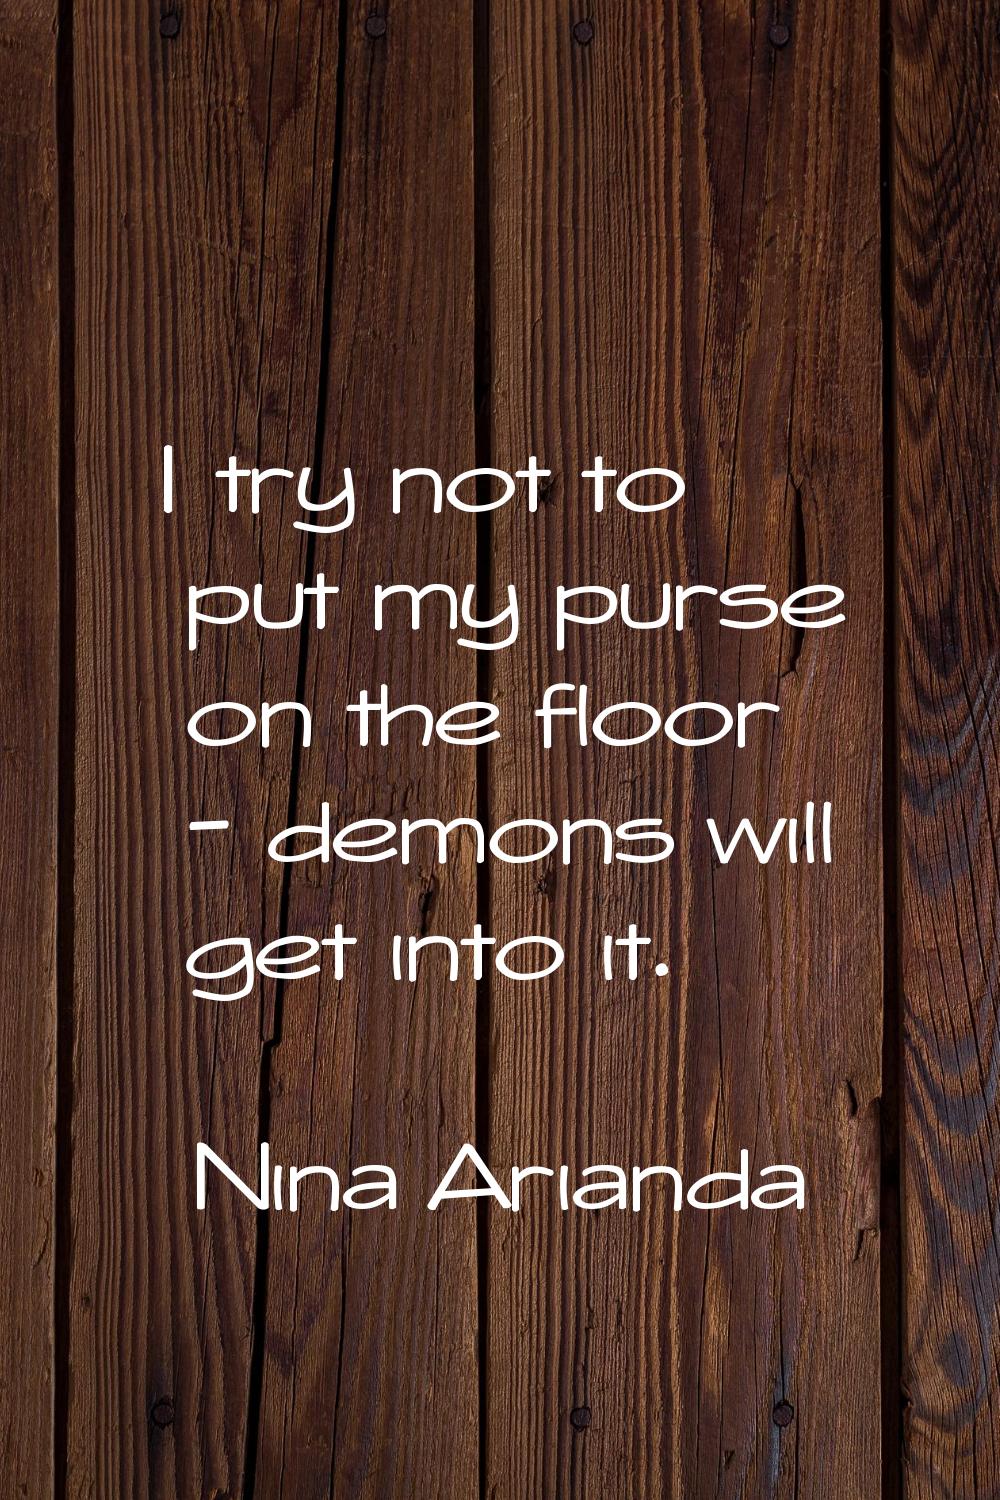 I try not to put my purse on the floor - demons will get into it.